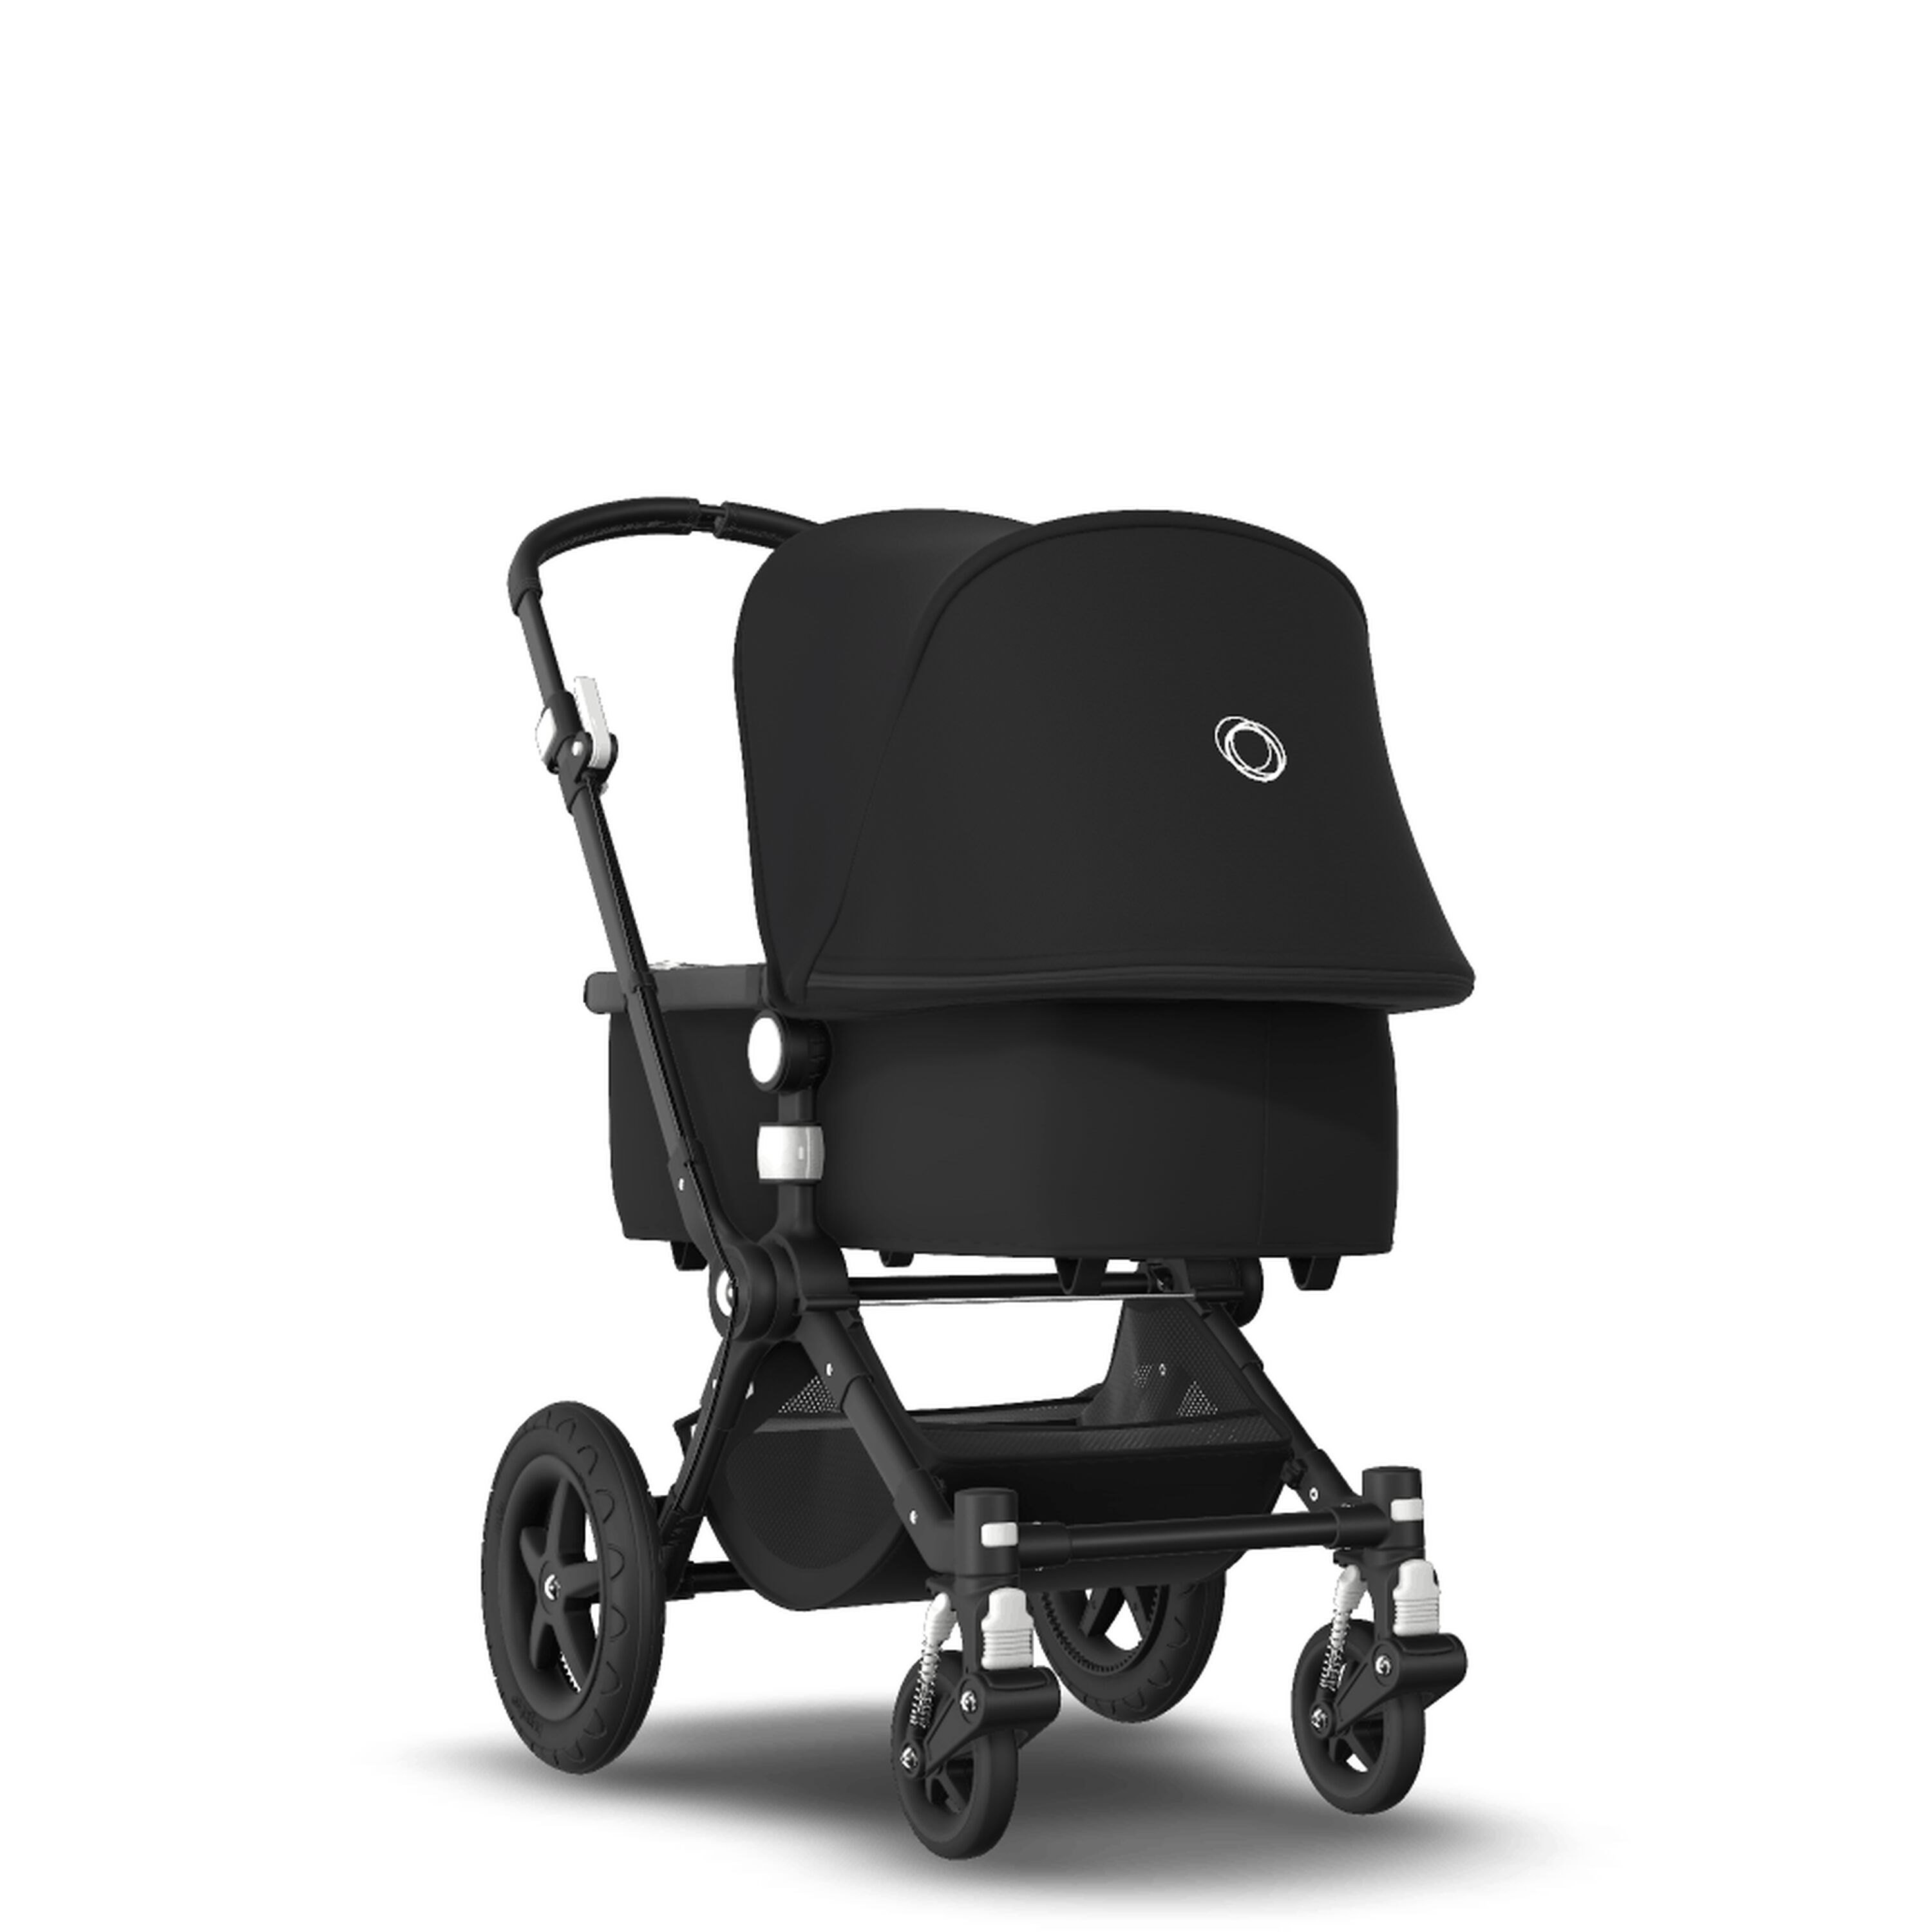 Bugaboo Cameleon 3 Plus seat and carrycot pushchair Black sun canopy, black fabrics, black chassis |